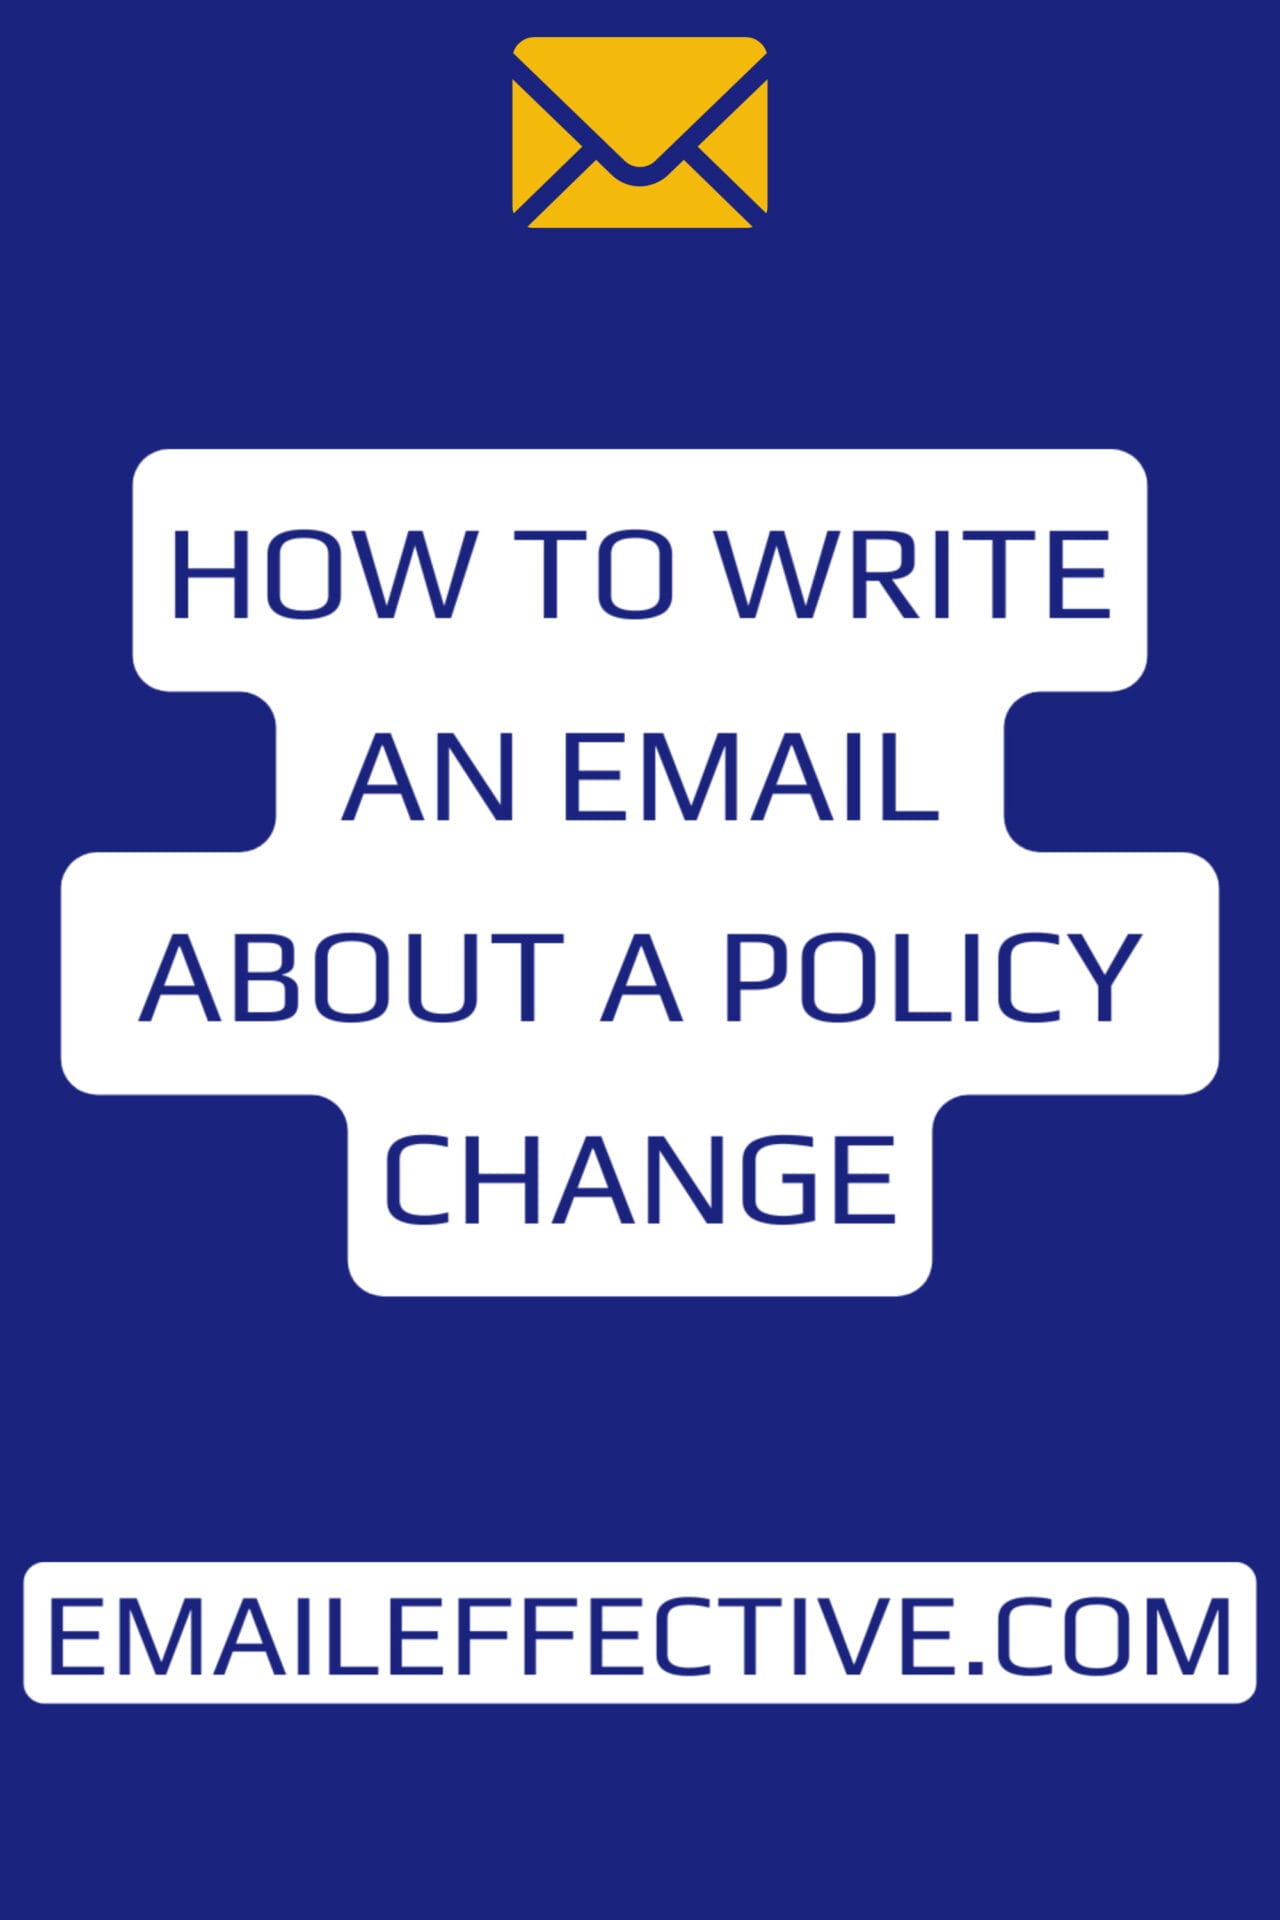 How to Write an Email About a Policy Change